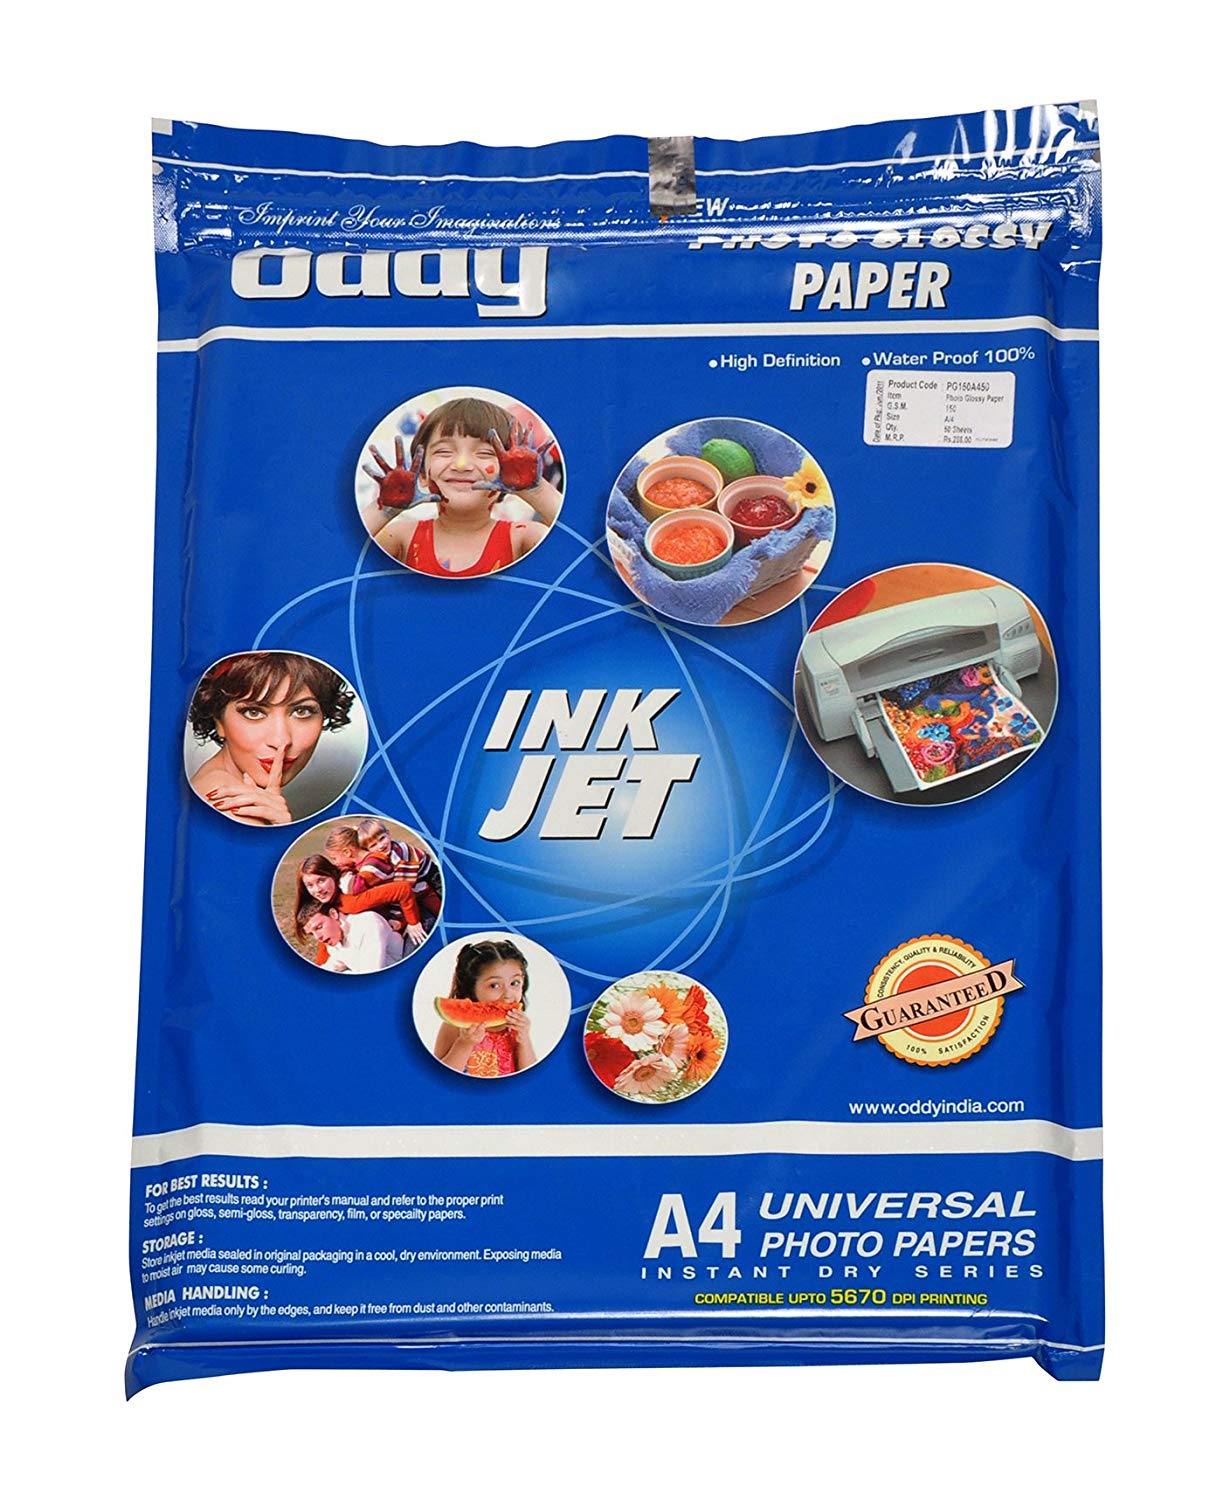 Oddy Coated Glossy Paper 230 GSM